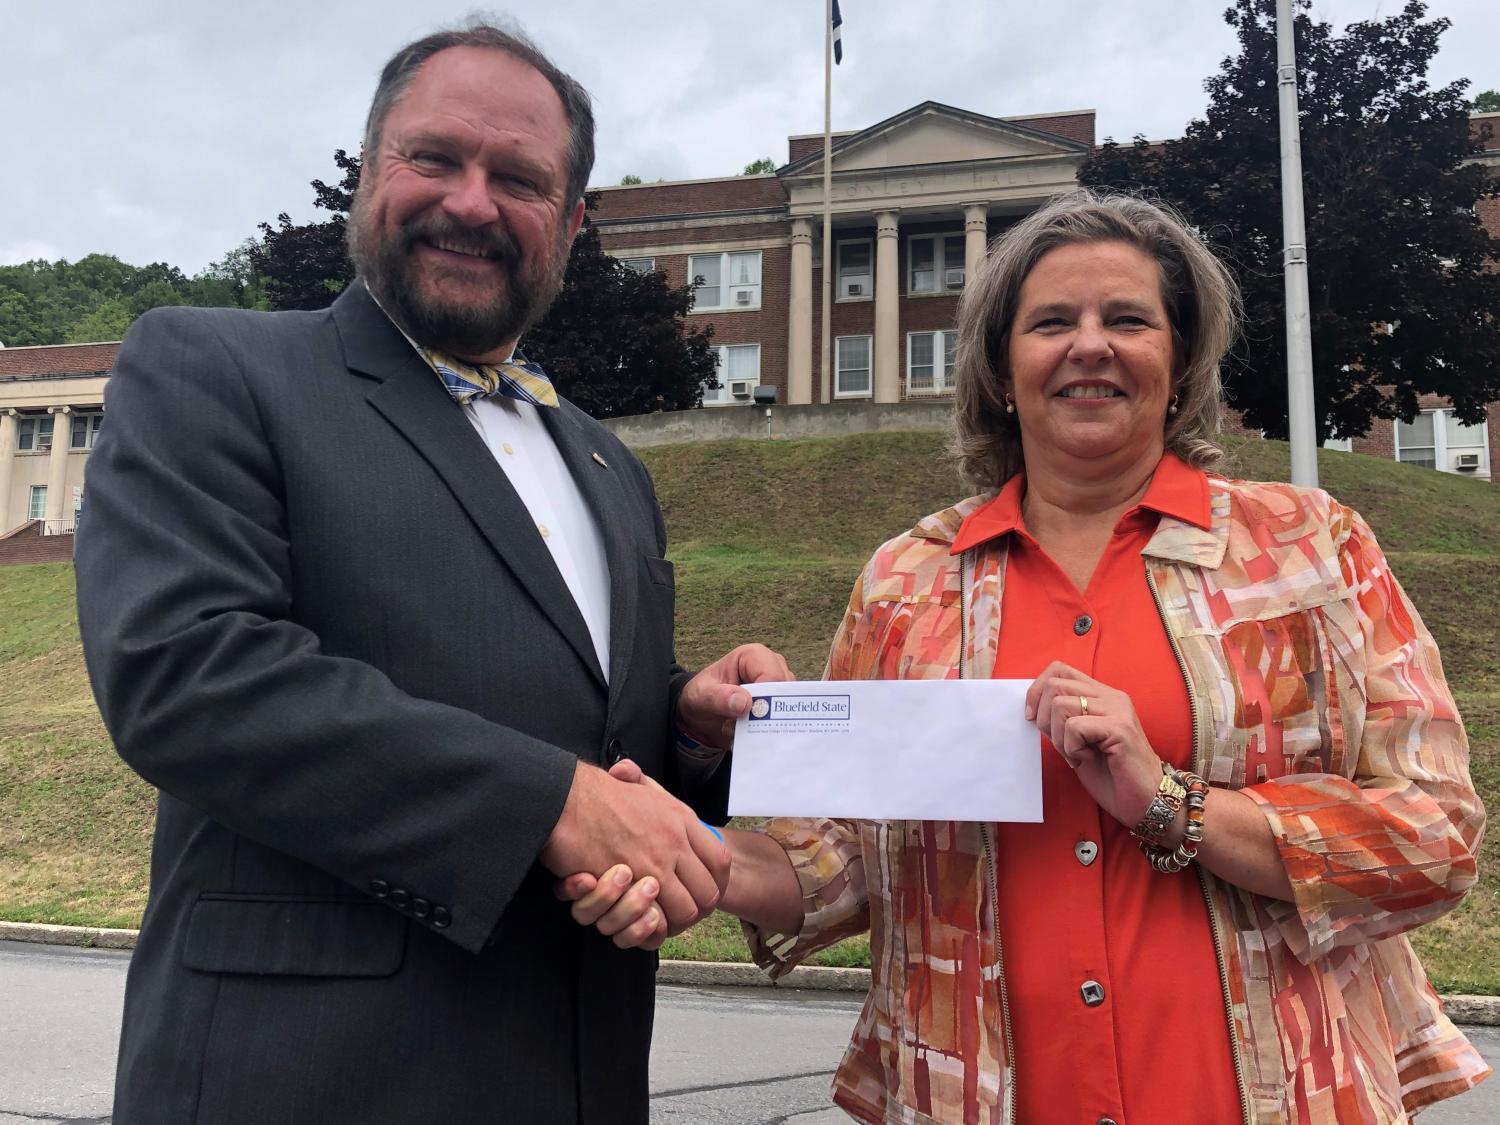 Bluefield State College’s Sherri Williams (right), has been named BSC’s 2020-2021 “Faculty of the Year” Recipient.  Professor Williams is pictured with Dr. Ted Lewis (left), BSC Provost, who presented her with a $1000 check from the Bluefield State College Foundation in recognition of her selection for the award.